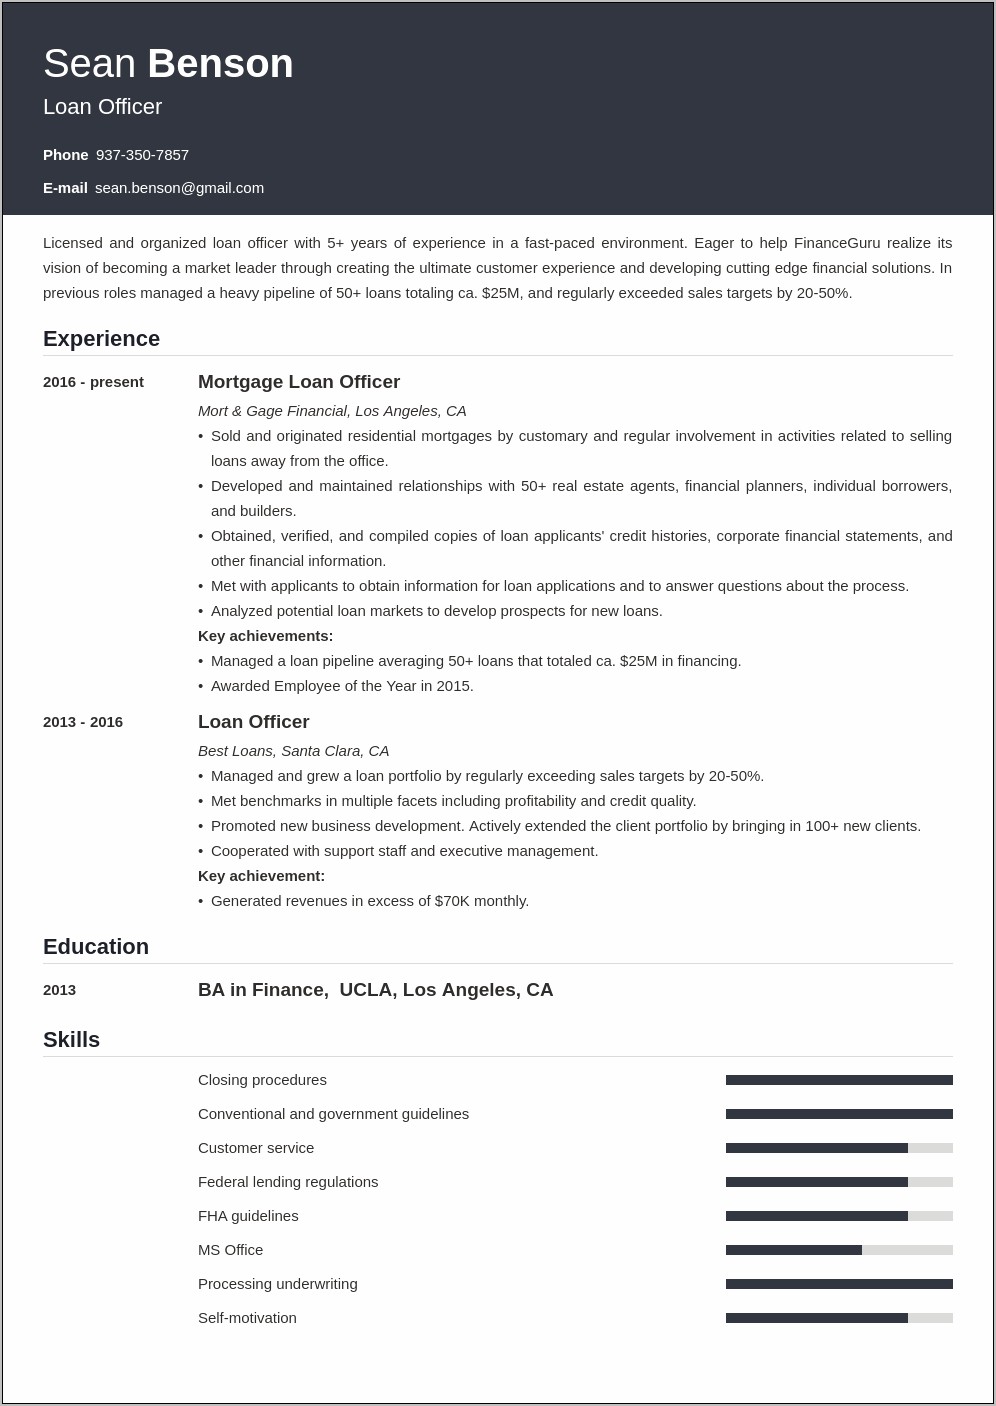 Example Of Professional Resume To Obtain Loan